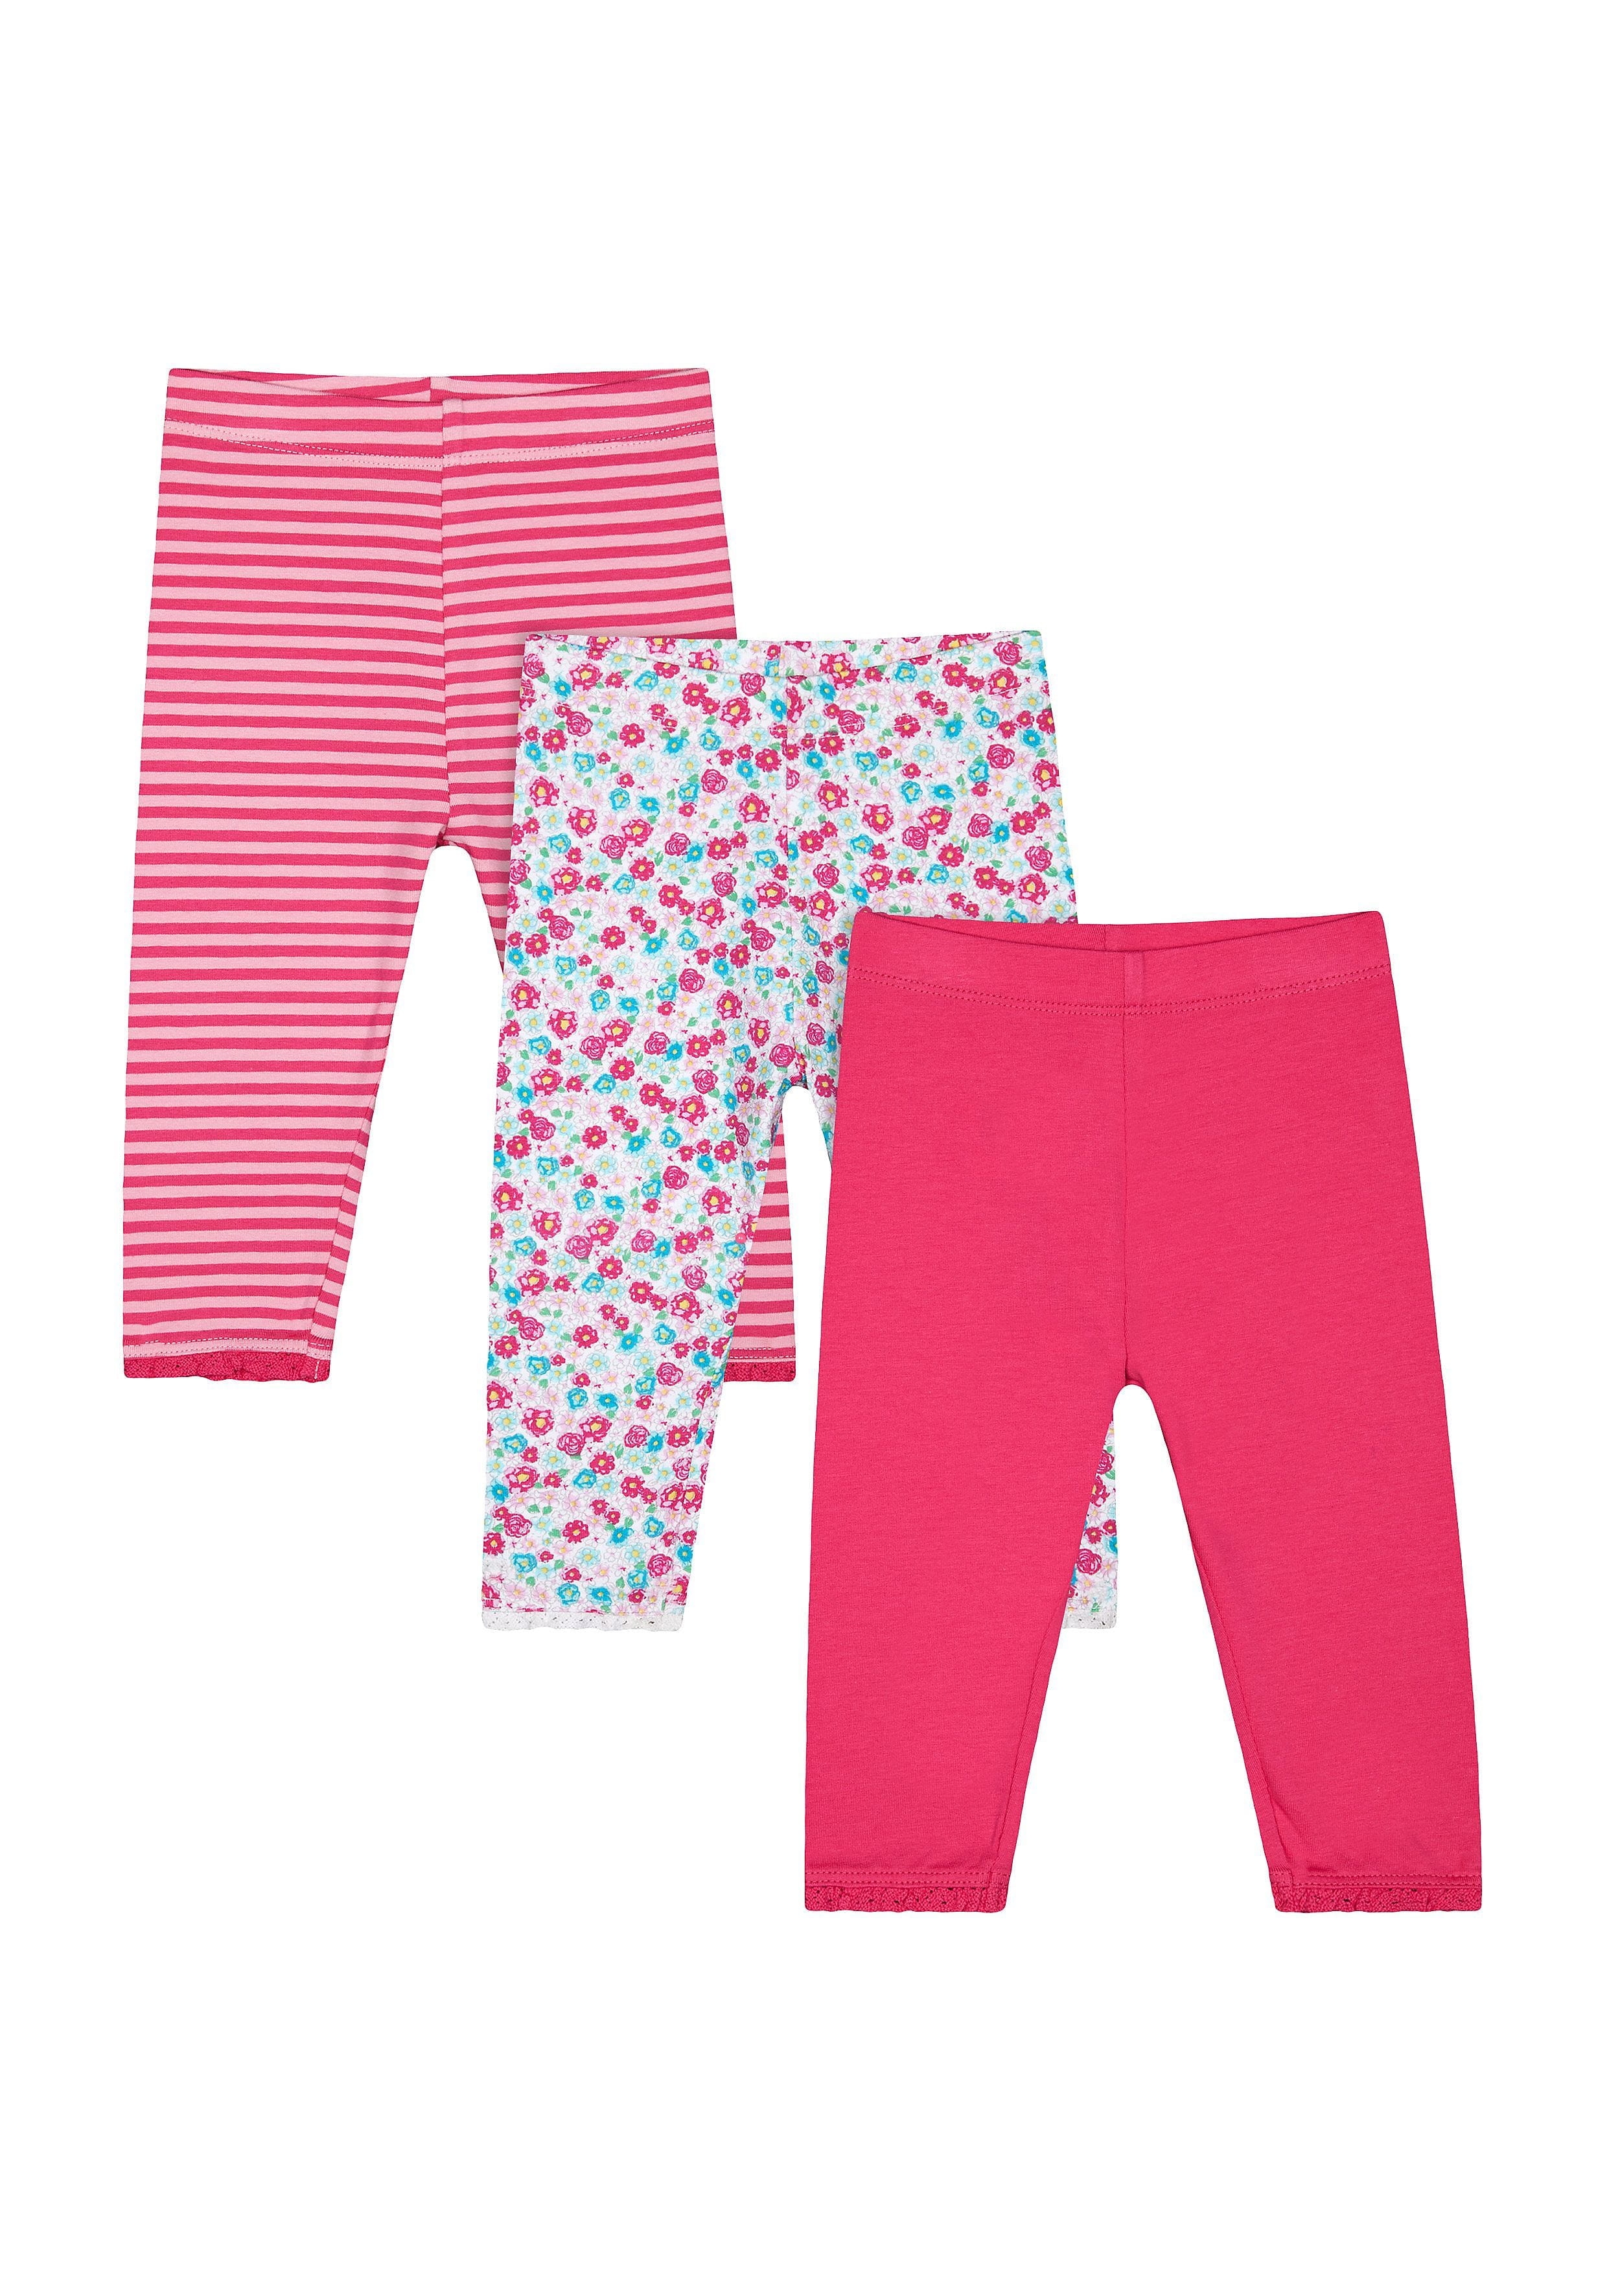 Mothercare | Pink, Striped and Floral Print Leggings - 3 Pack 0